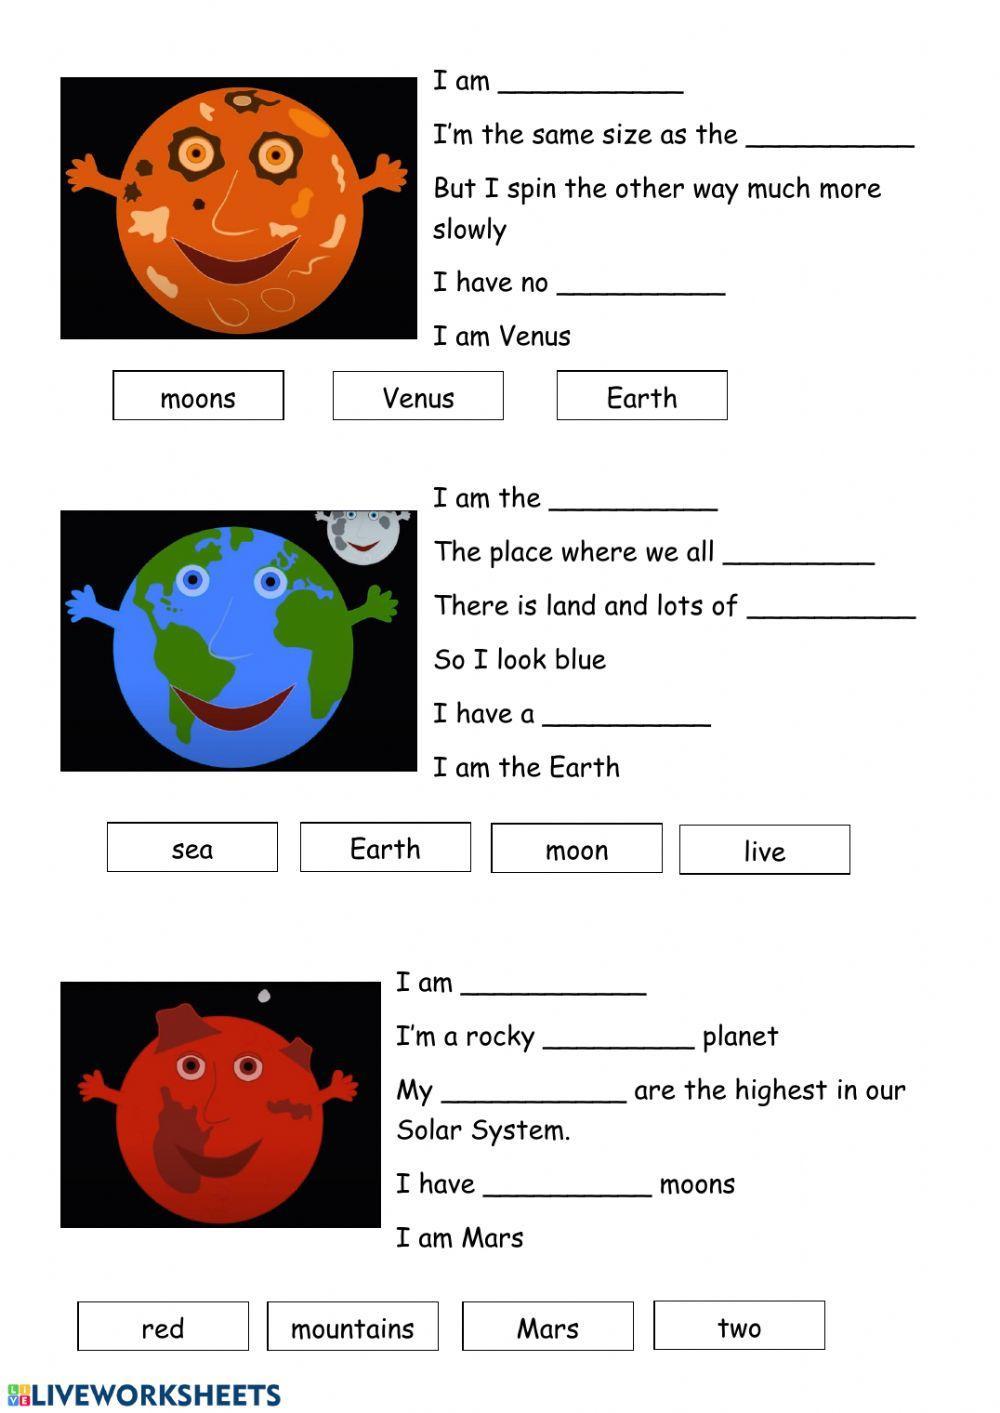 The Solar System song